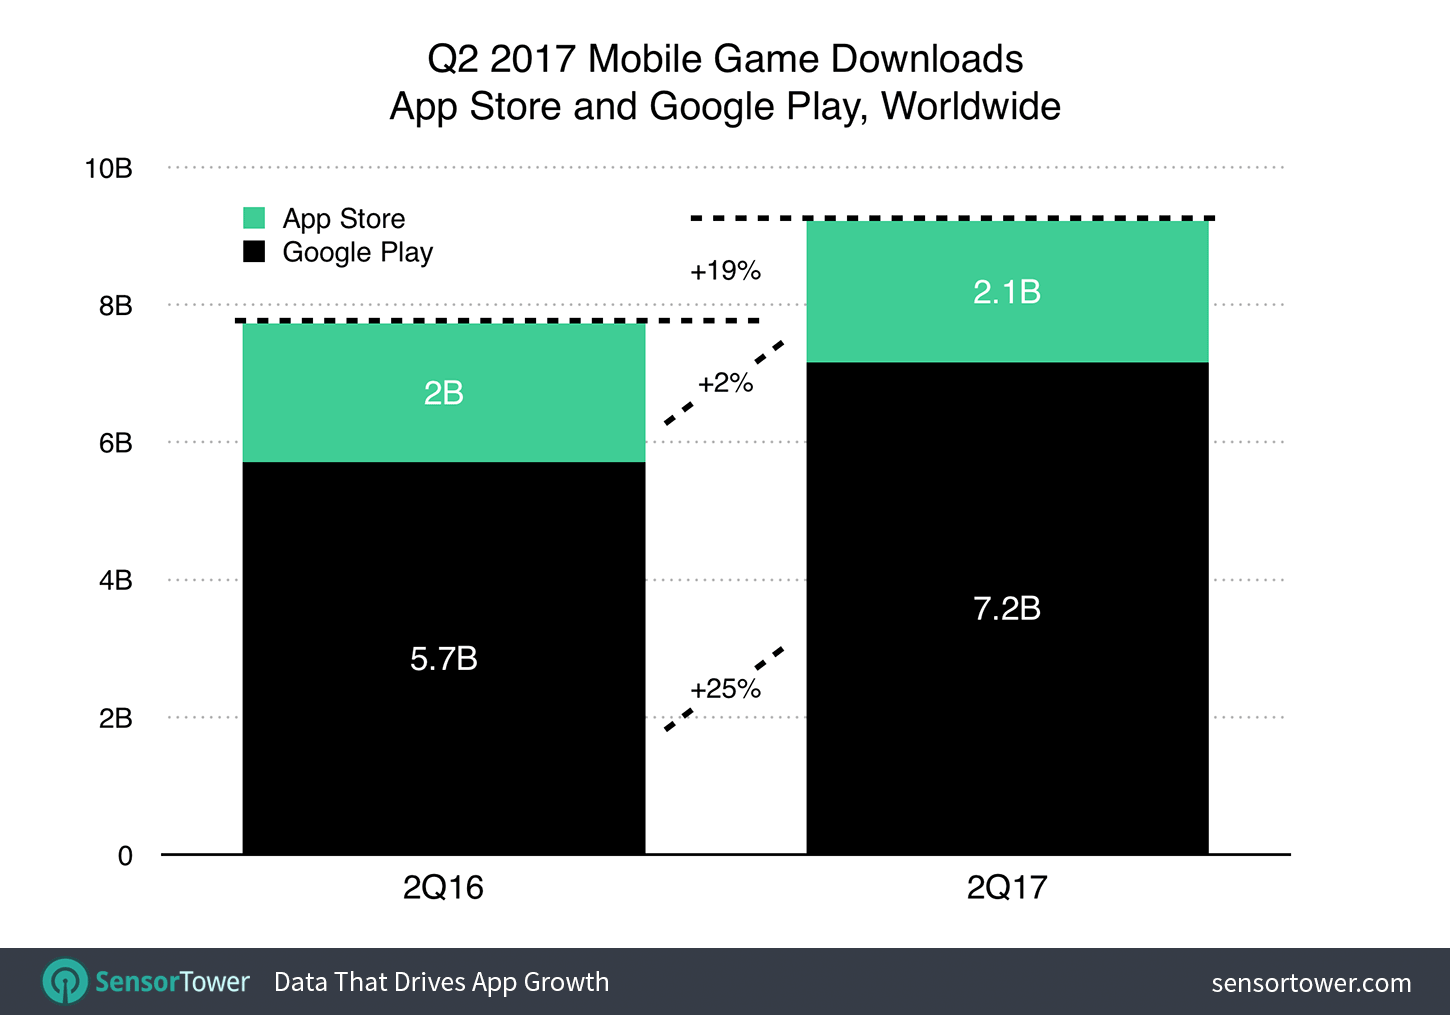 Q2 2017 Games Category Worldwide Download Growth